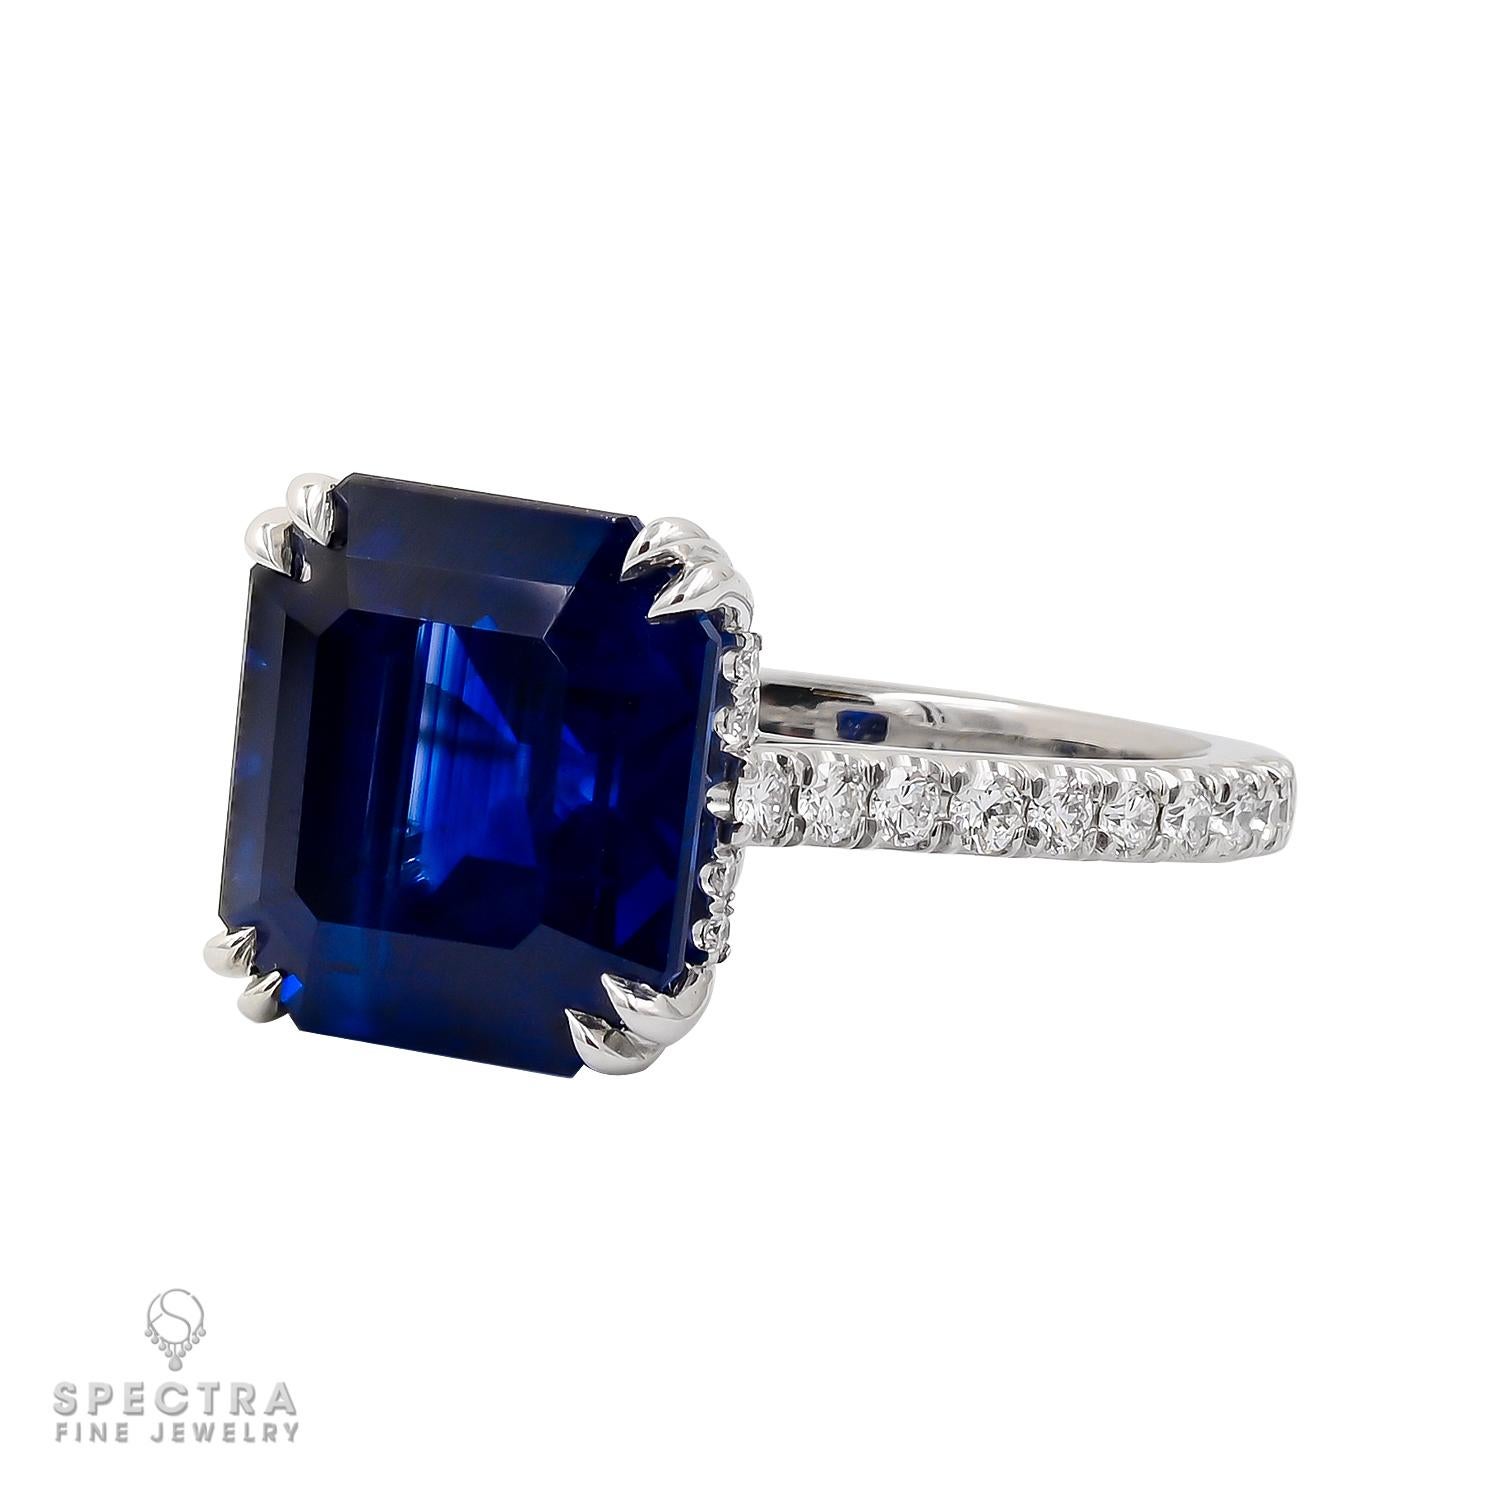 This Spectra Fine Jewelry Ceylon Sapphire Diamond Pavé Ring epitomizes timeless elegance with its classic design and striking details. Crafted in platinum, it features a rare unheated Ceylon sapphire weighing 8.06 carats and showcasing rich color